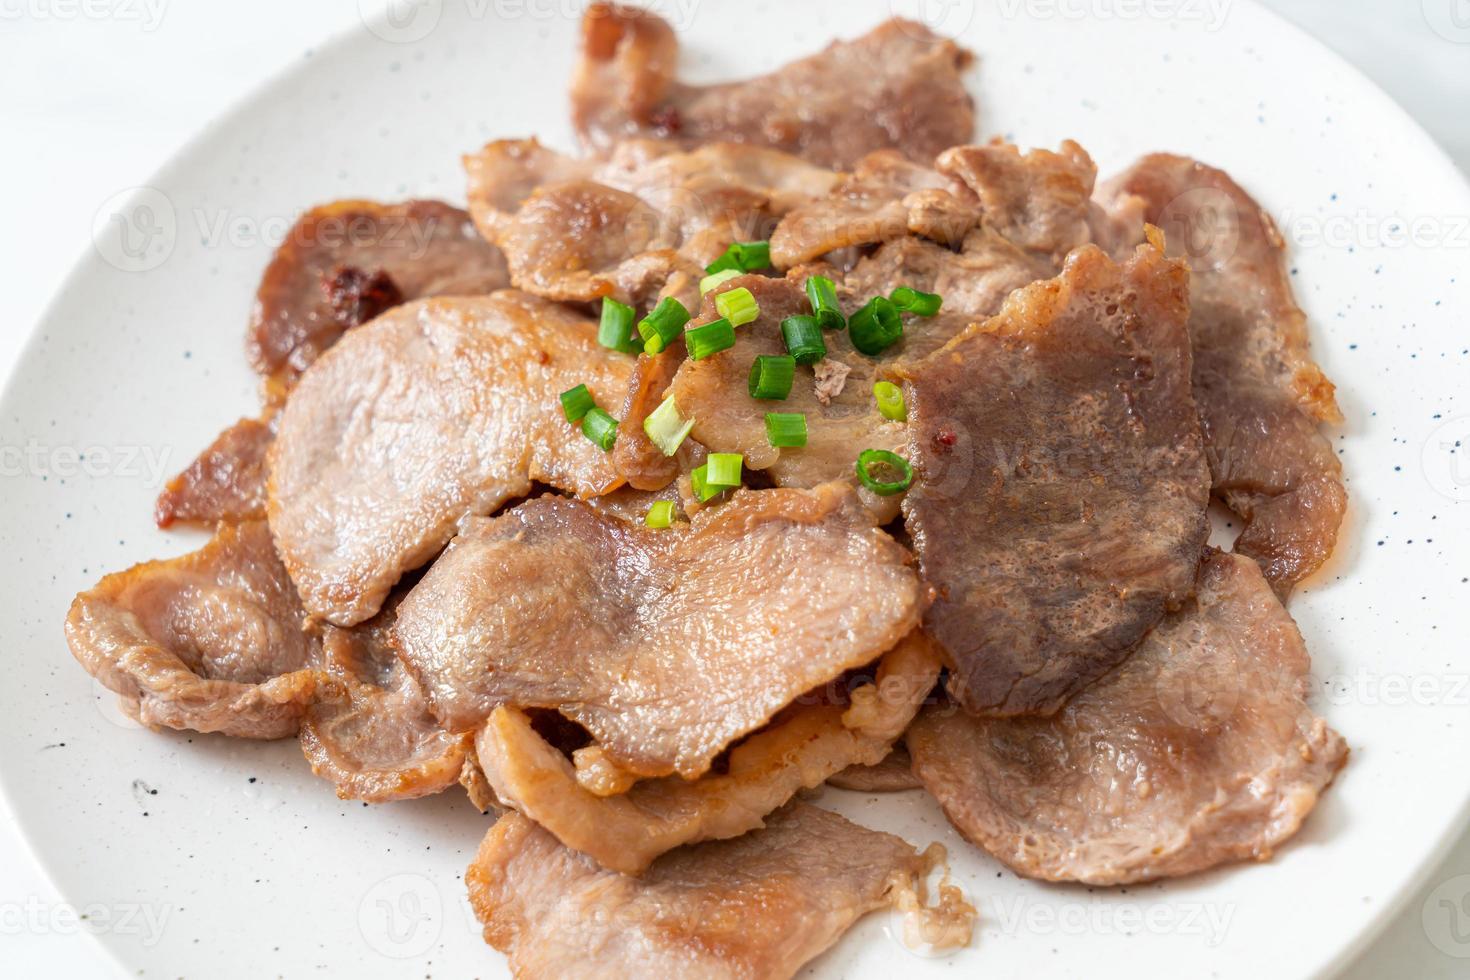 Grilled pork neck sliced on plate in Asian style photo